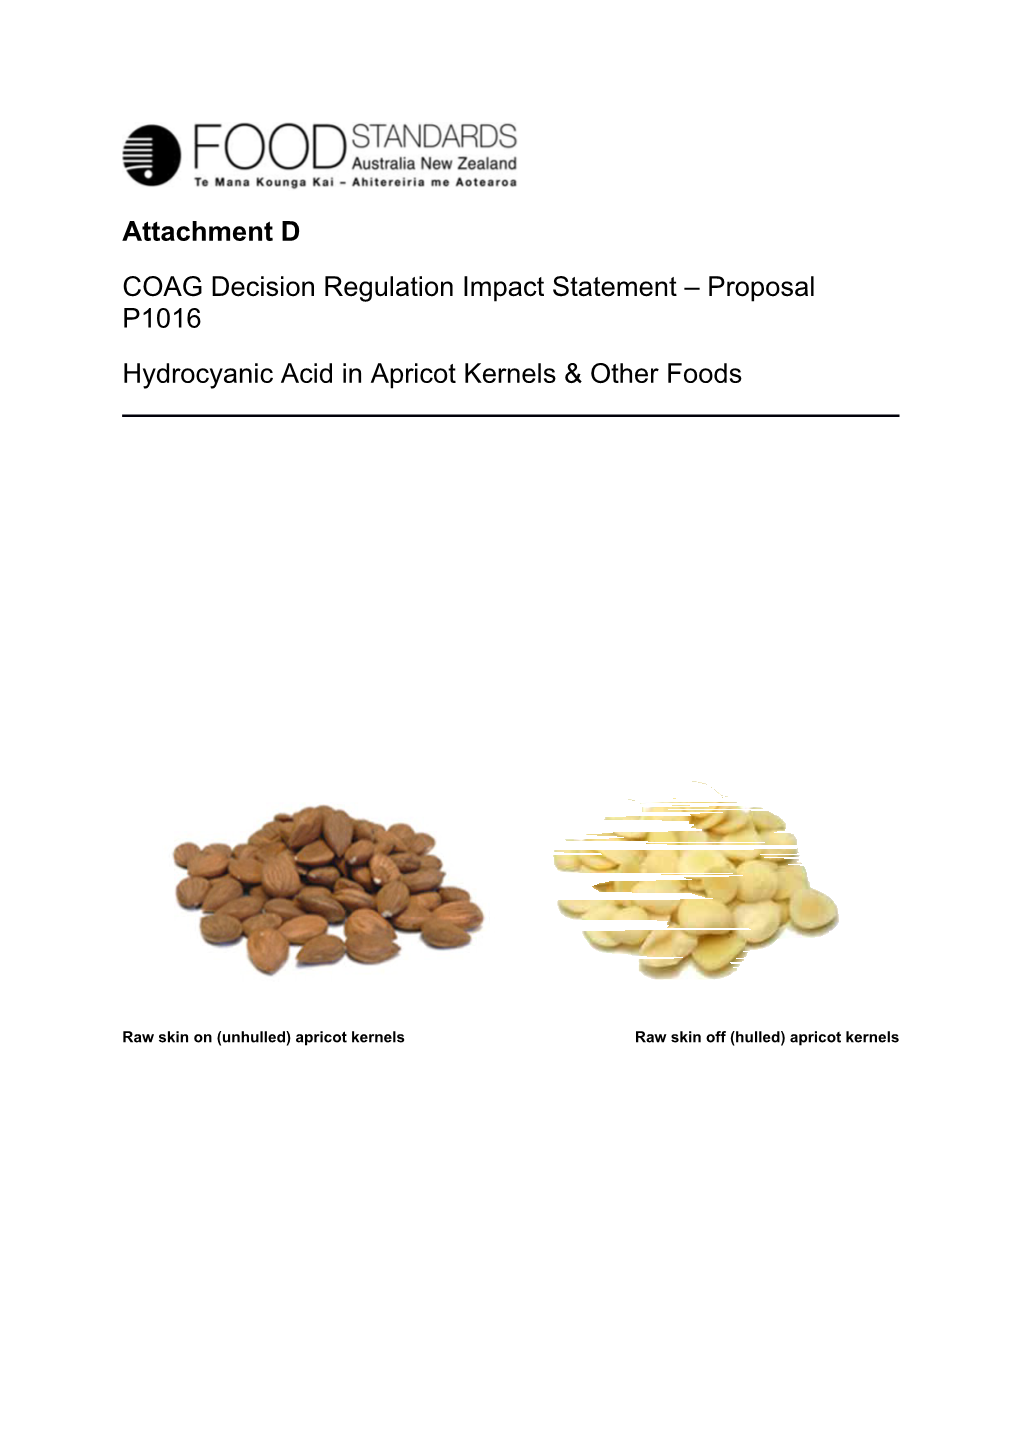 Hydrocyanic Acid in Apricot Kernels & Other Foods Decision RIS